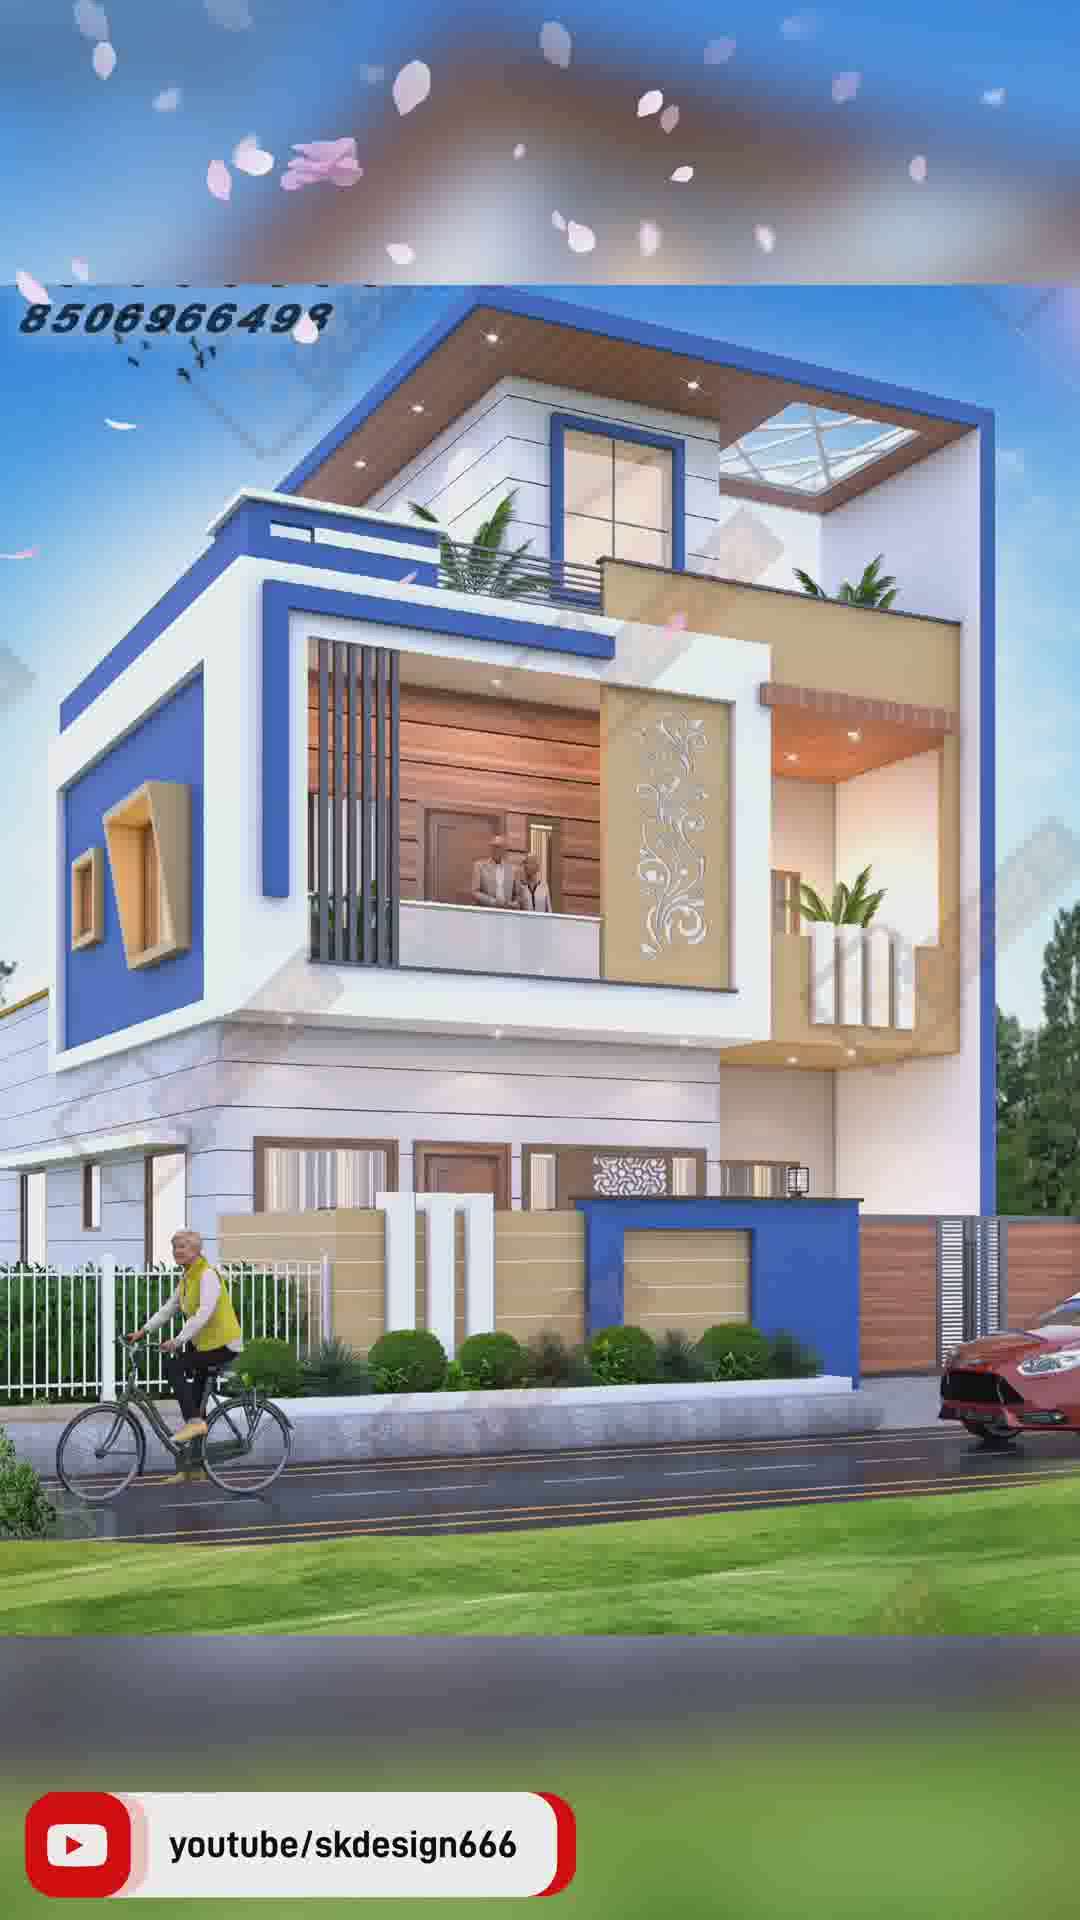 3d house design by me
#skdesign #HouseDesigns #HouseConstruction #3dhousedesigns #frontElevation #facade #Delhihome #koloviral #kolopost